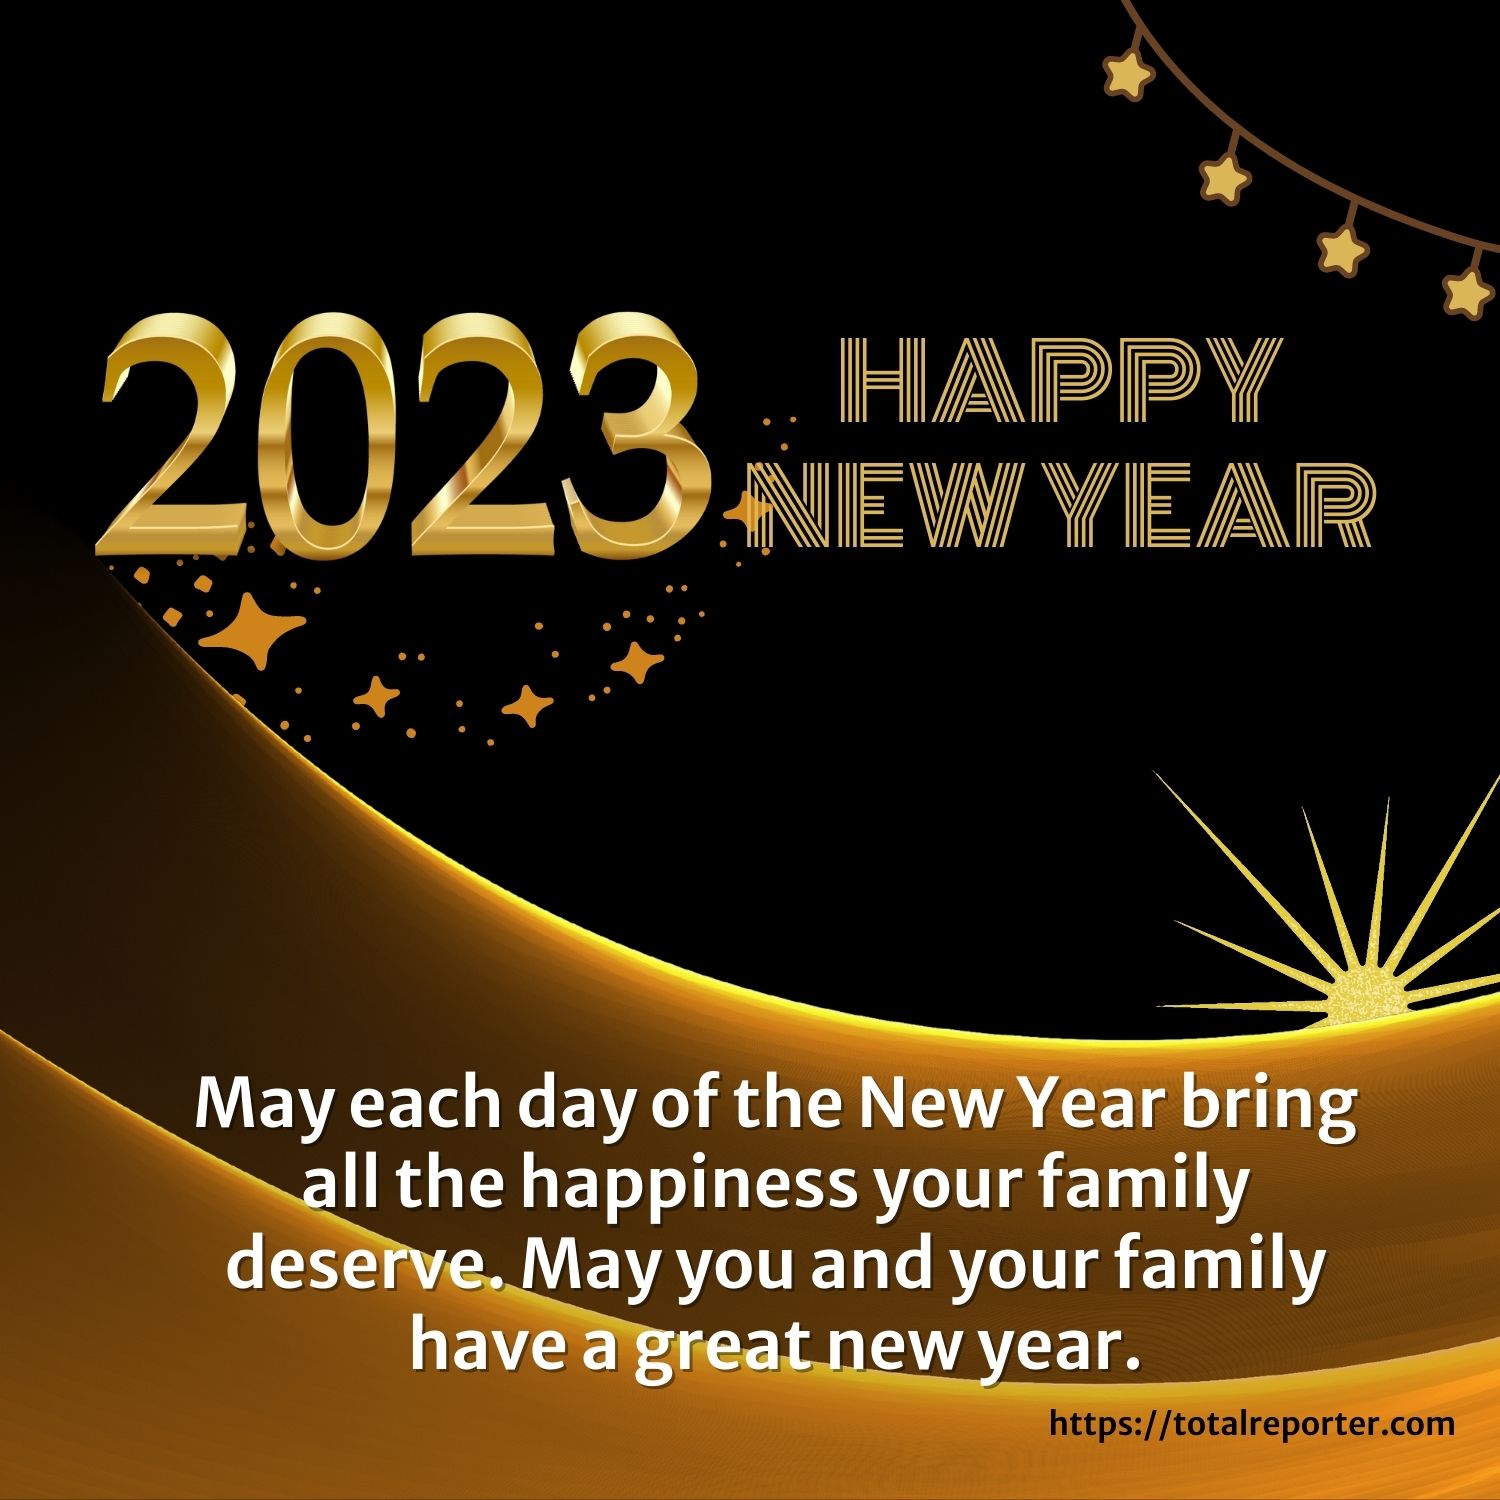 Happy New Year 2023 wallpapers For Whatsapp